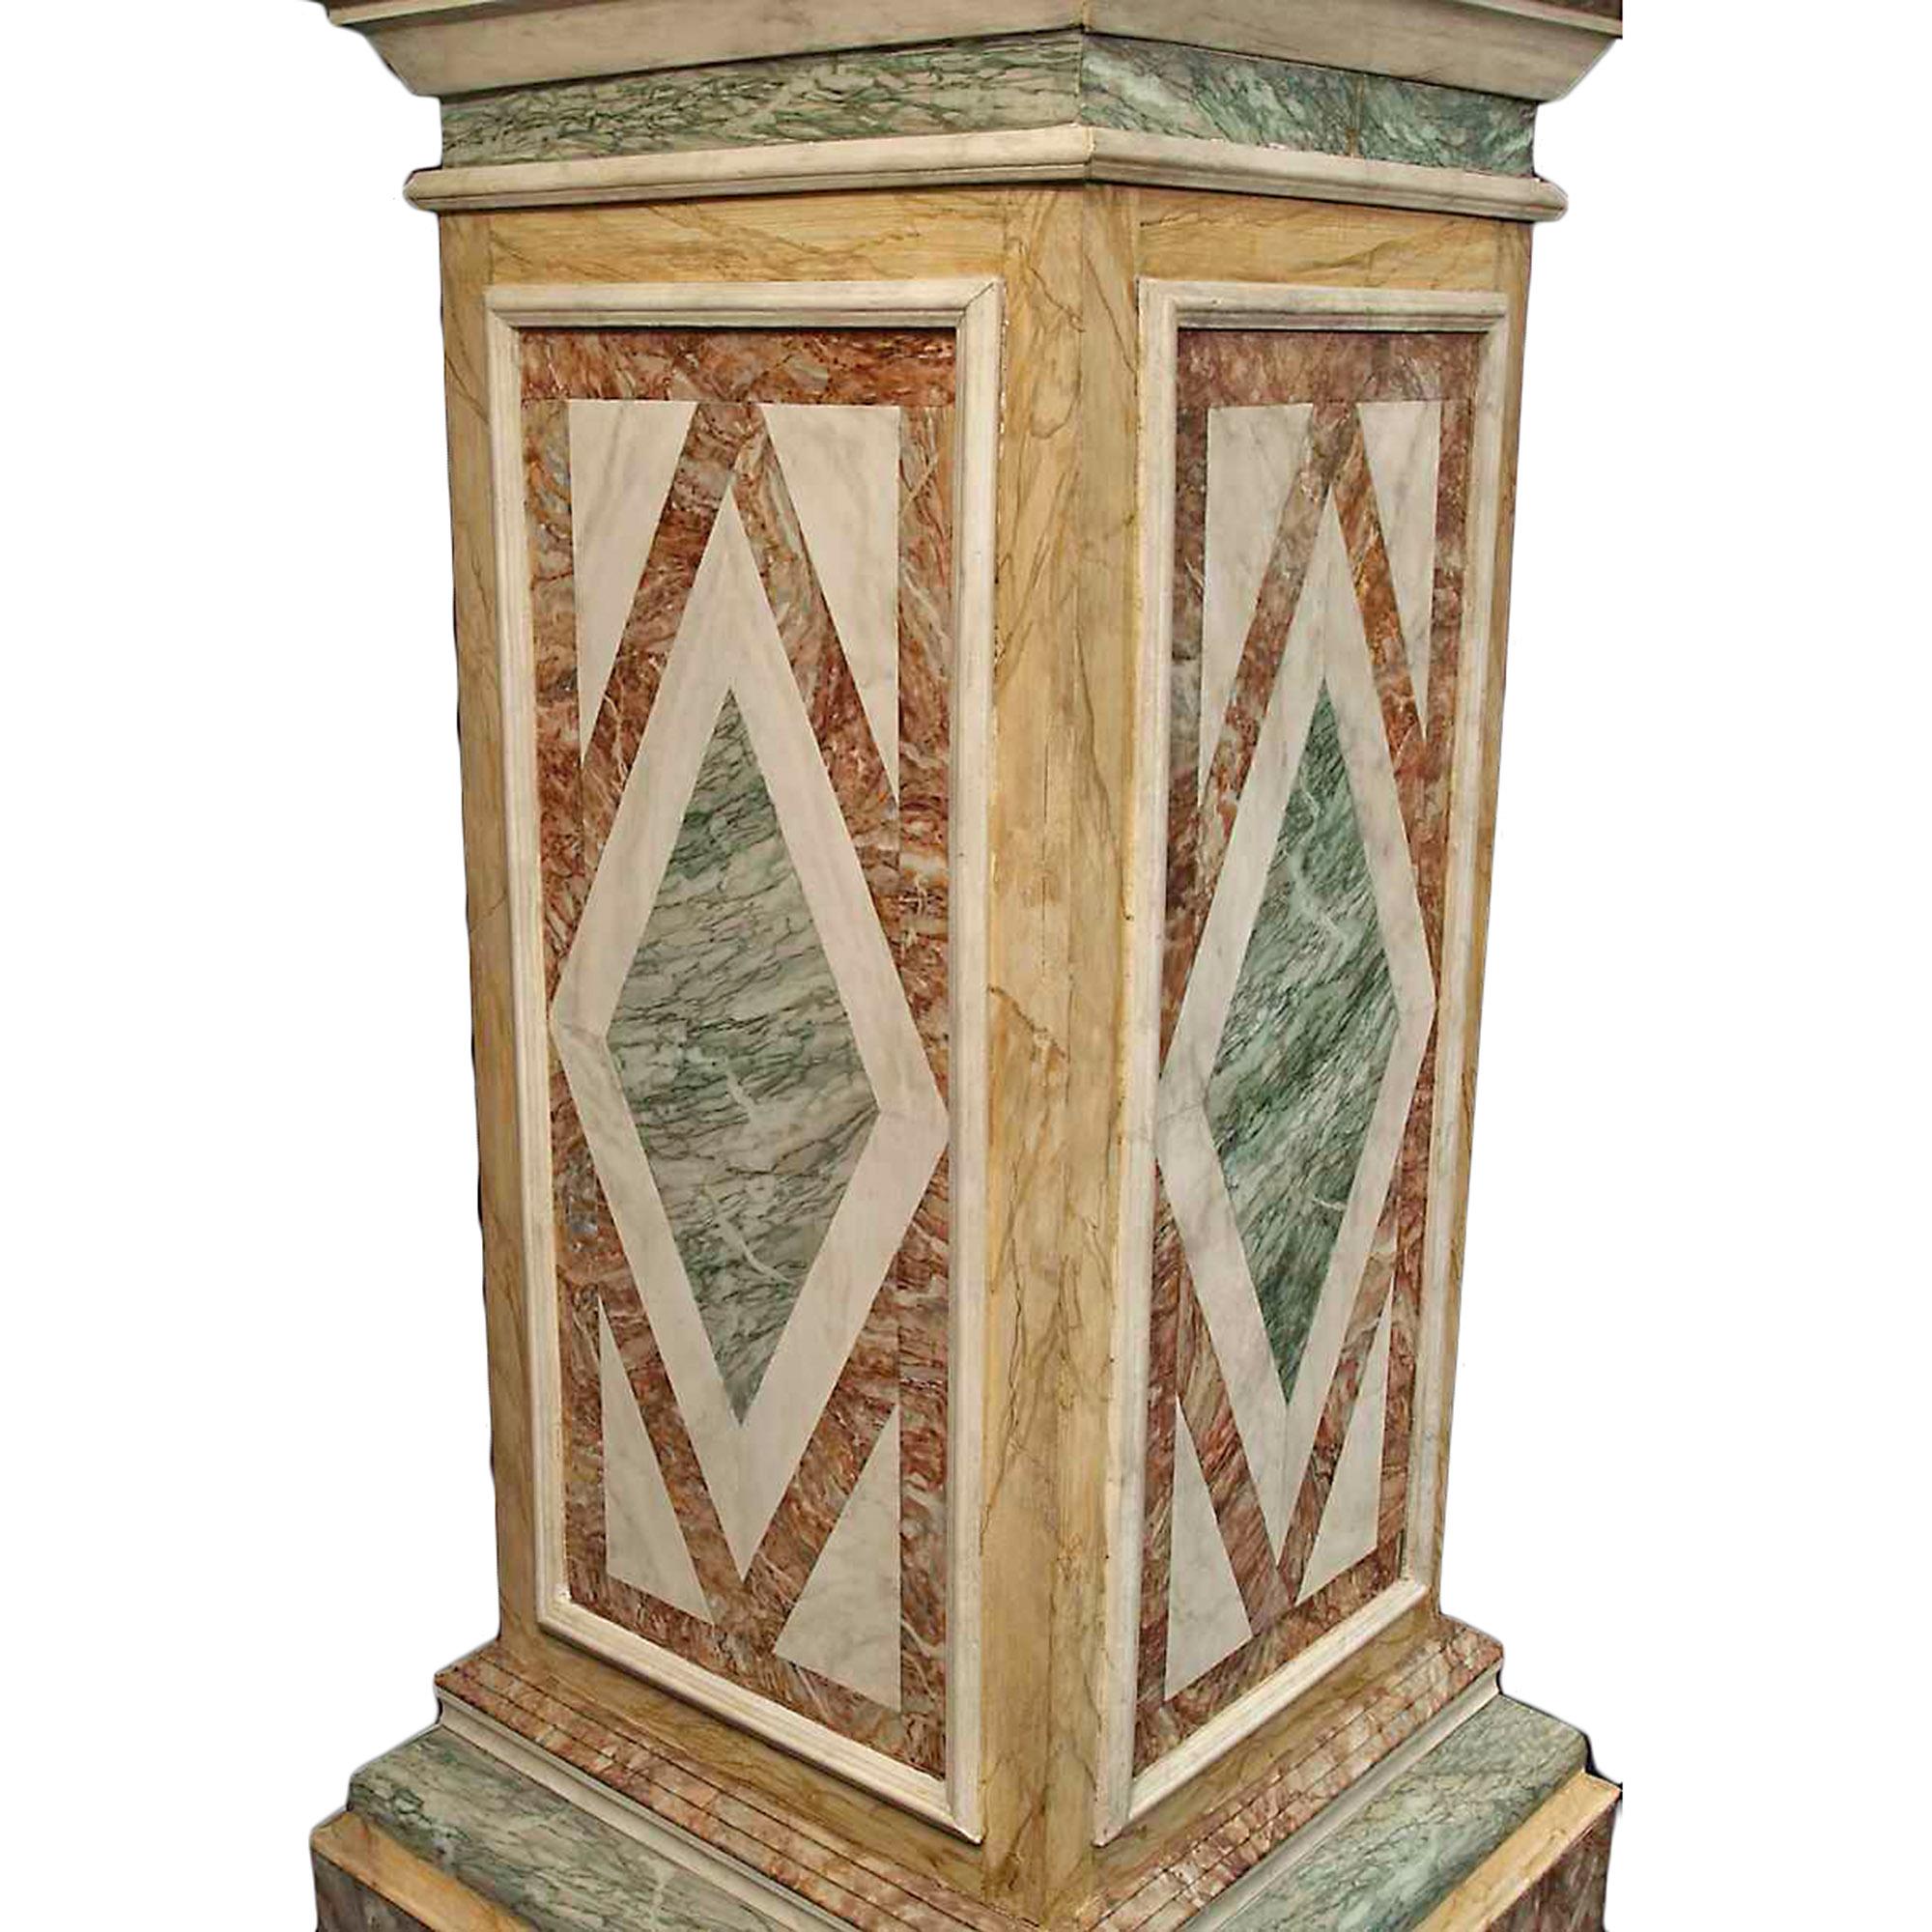 An attractive and high quality pair of French turn of the century faux marble painted wood pedestals. The square base has thick mouldings while the central paneled support has a very detailed diamond shaped design all sides, with a door in the back.